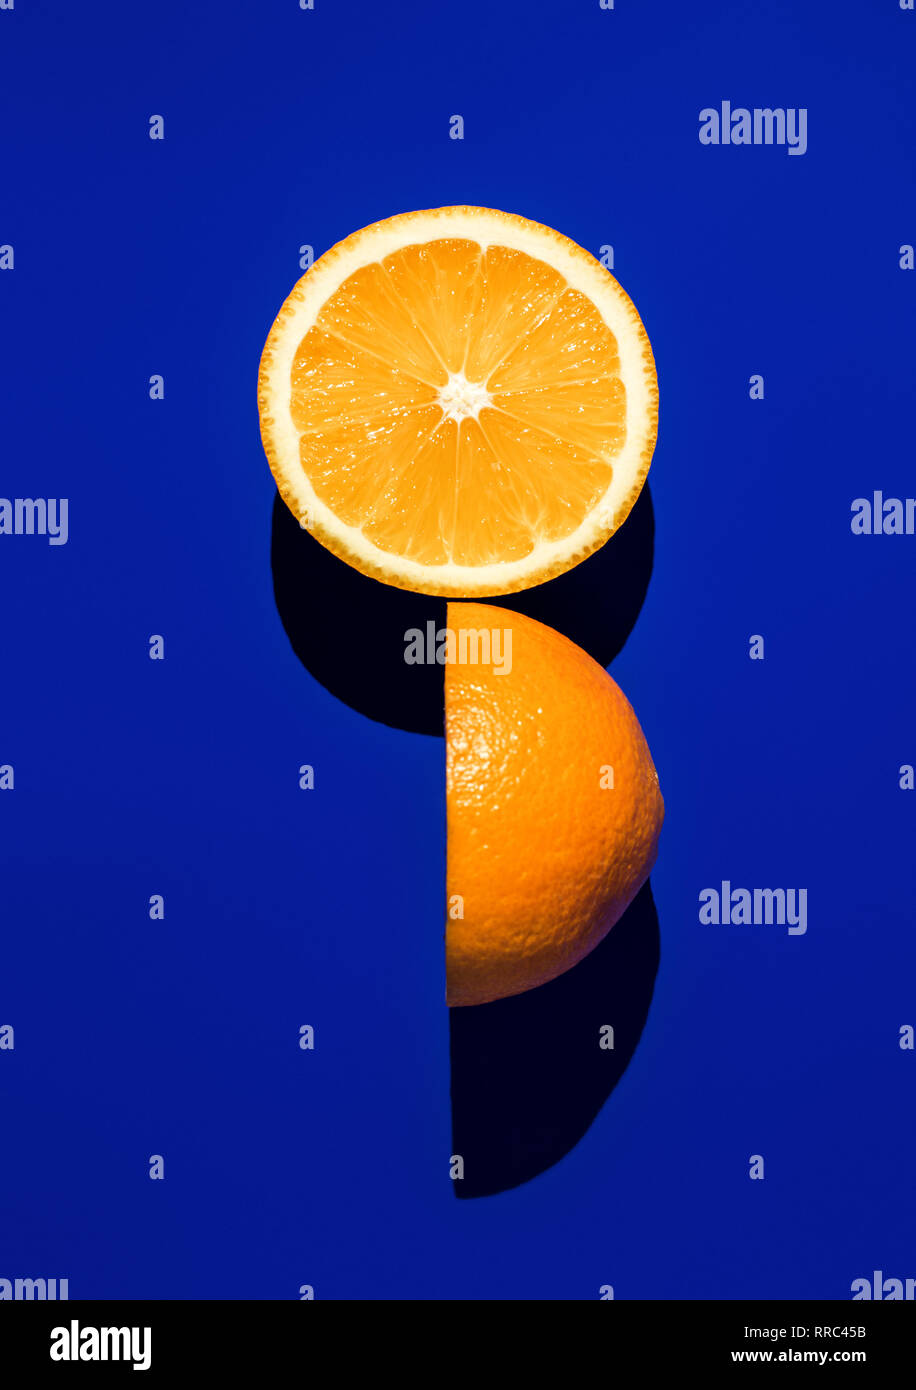 Two halves of ripe orange on a blue background in bright sunlight Stock Photo